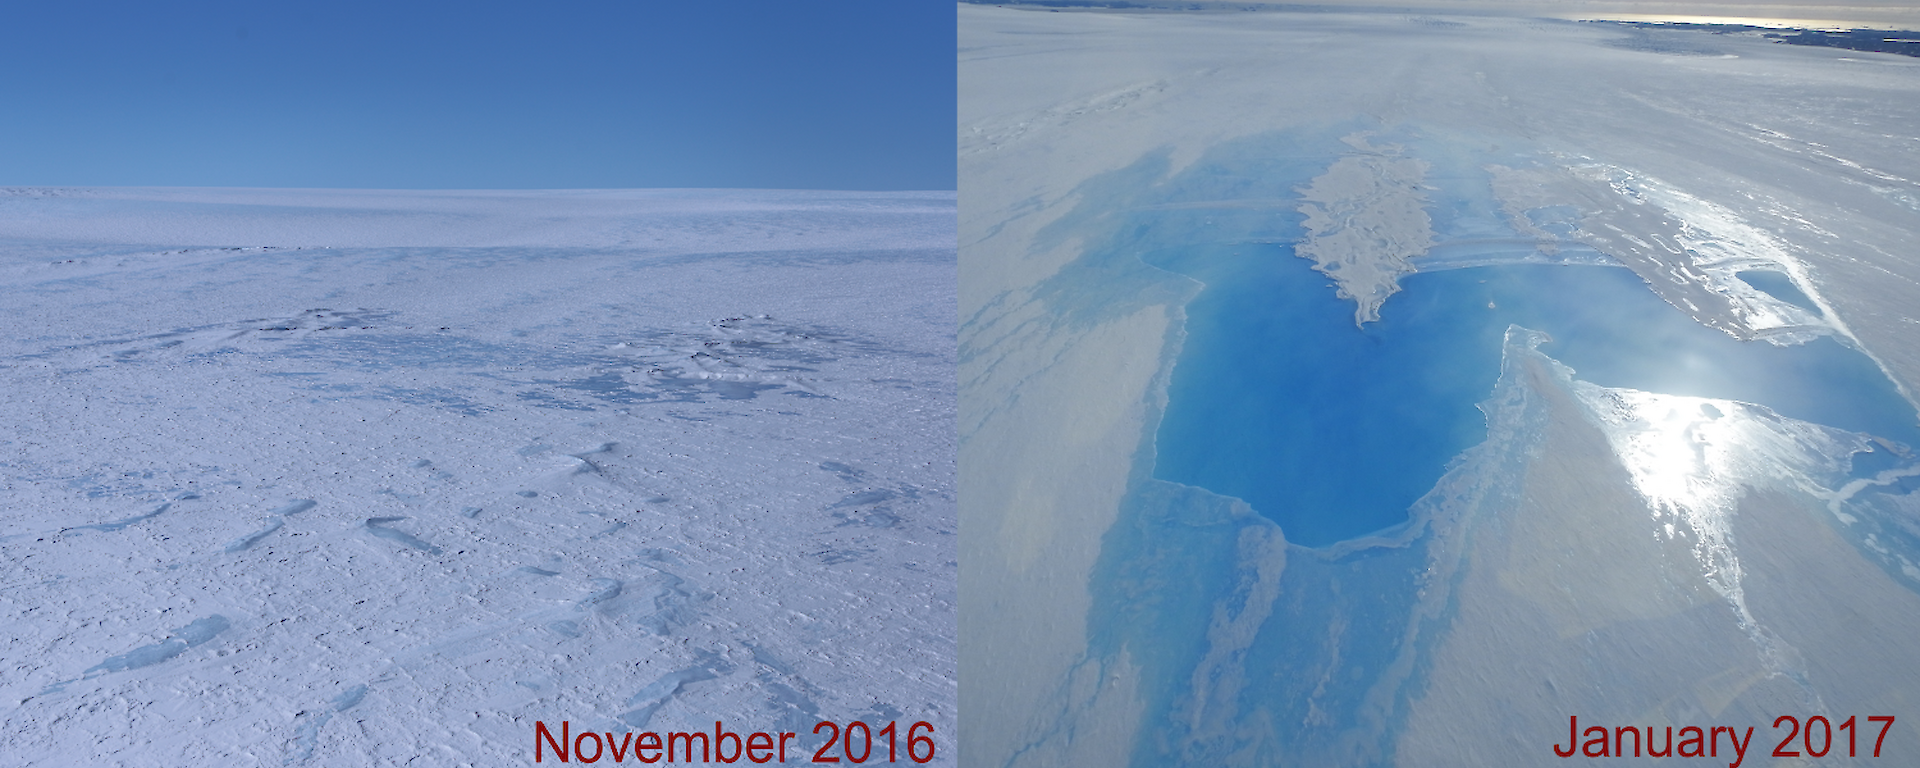 Two images of Twin Lakes showing the snow cover in winter, and the melt at the end of the season